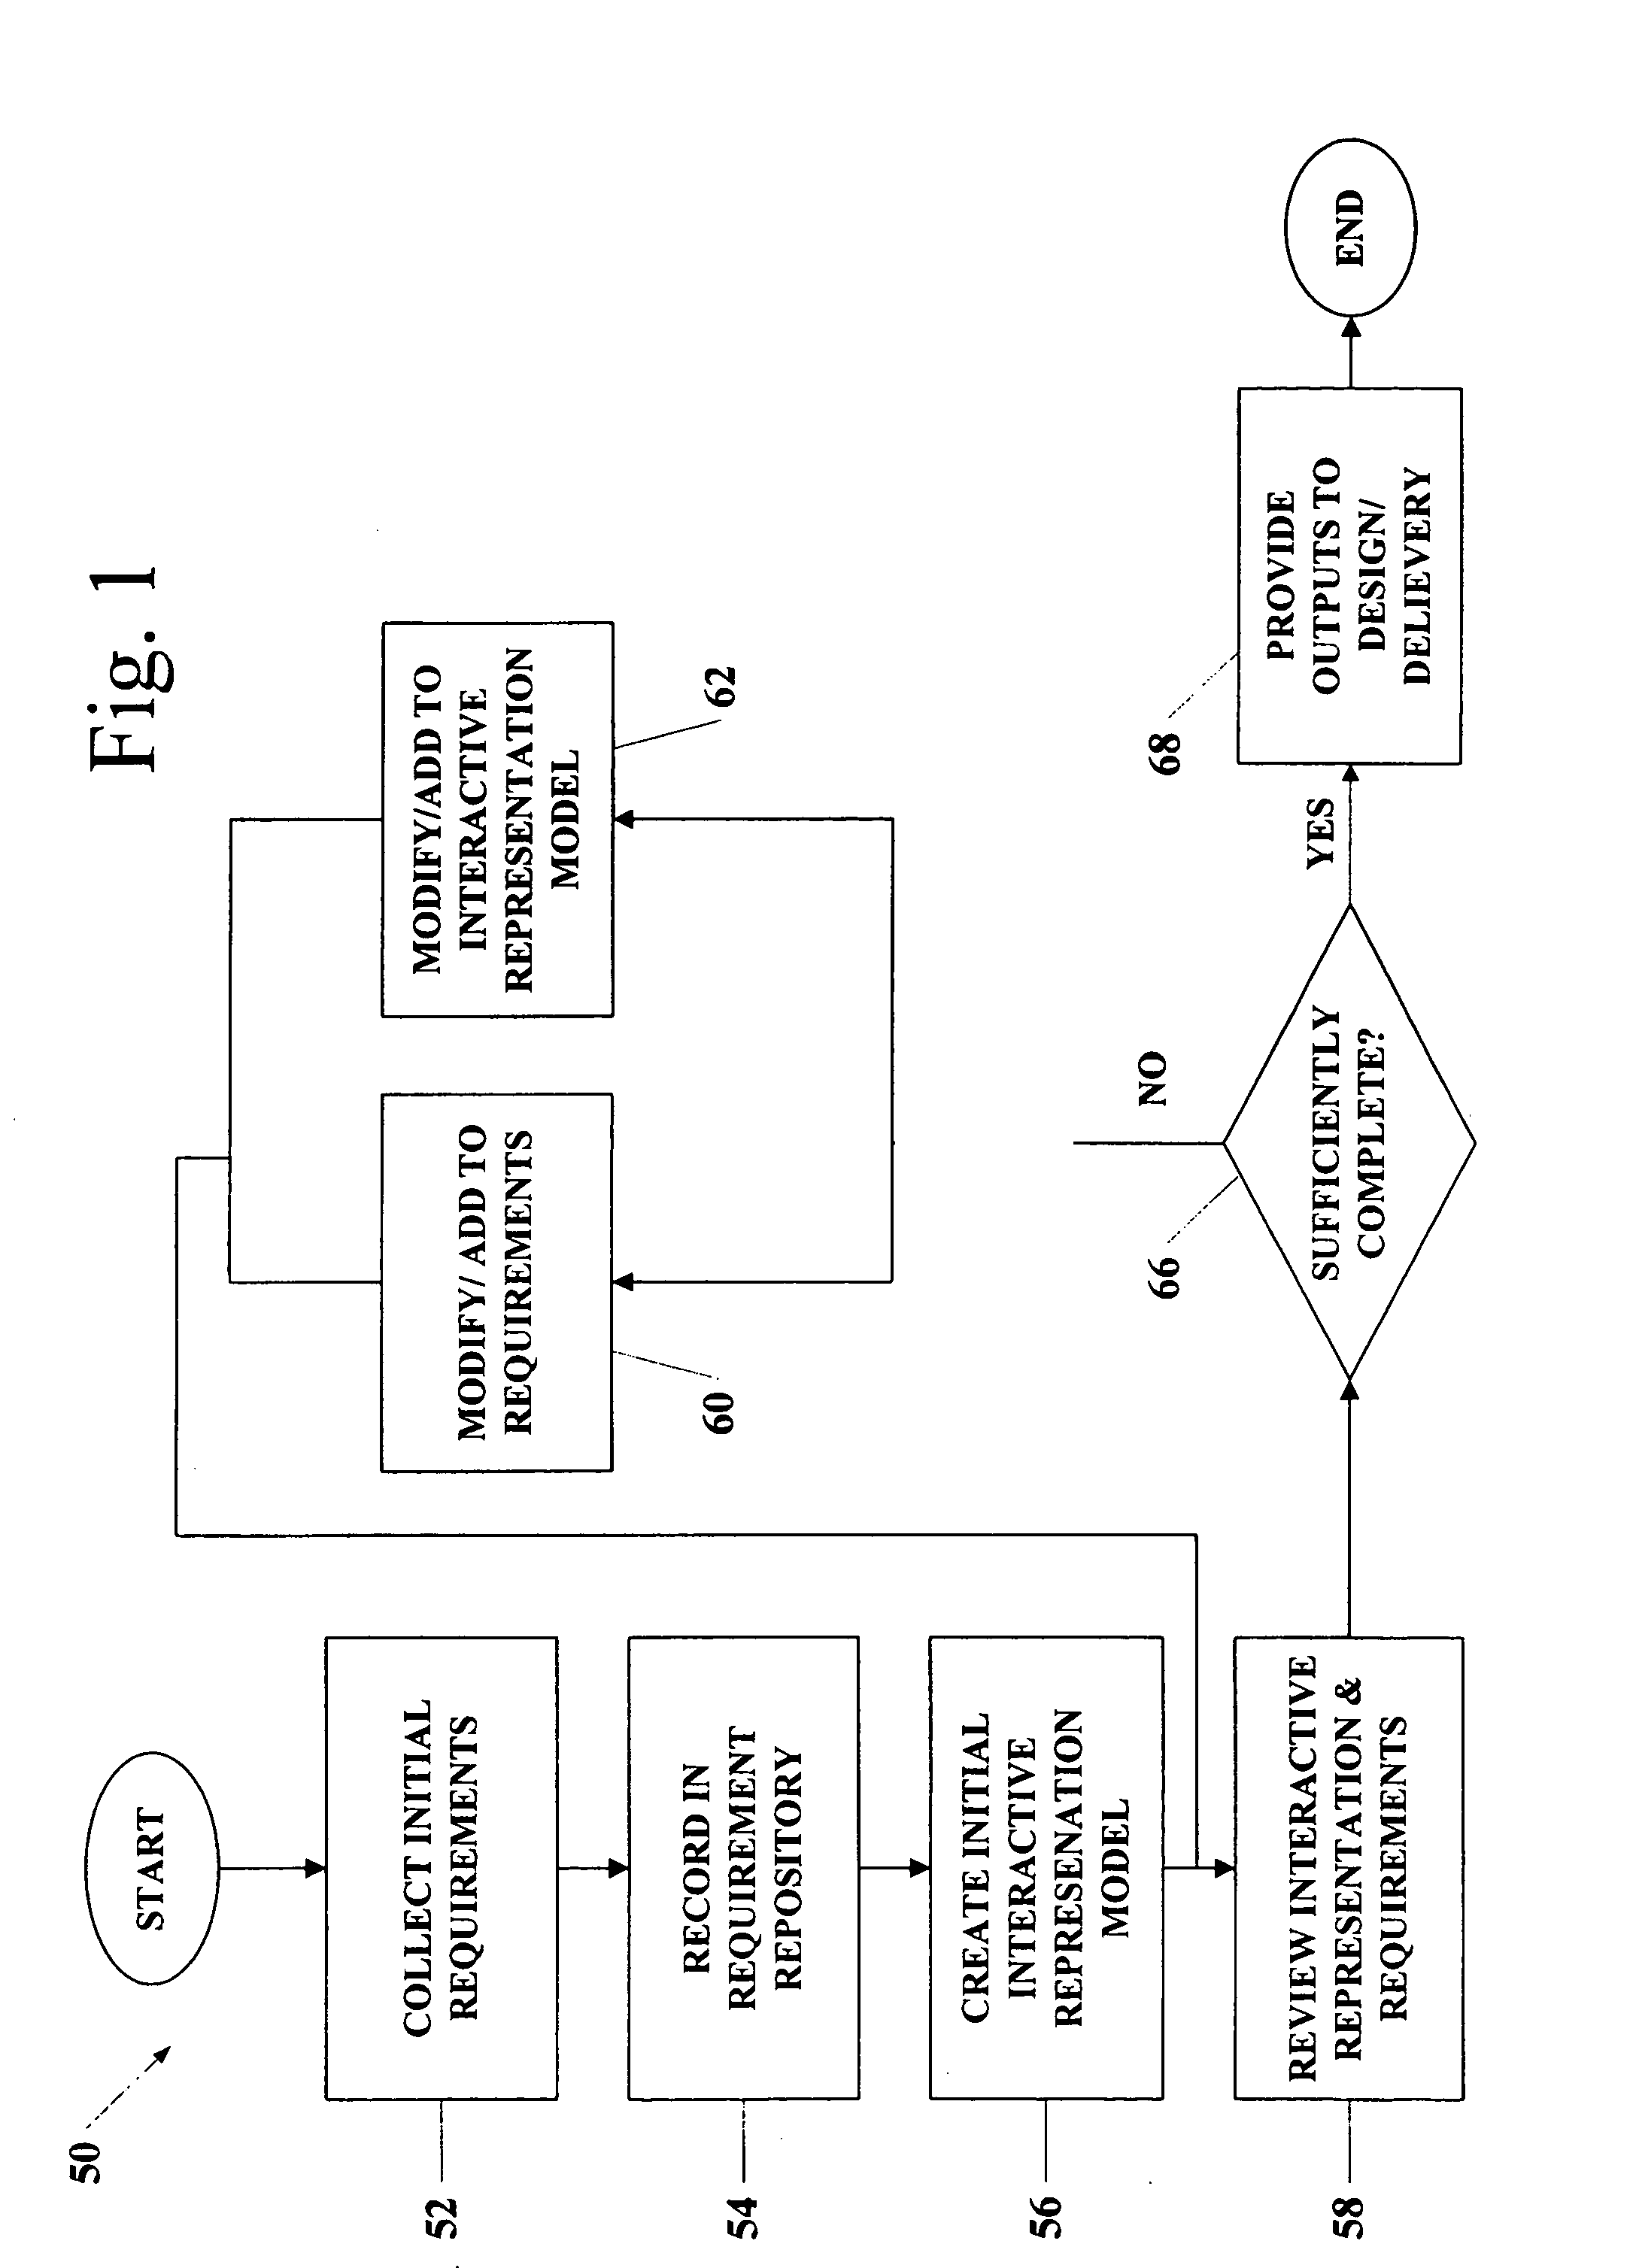 Systems and methods for defining a simulated interactive web page